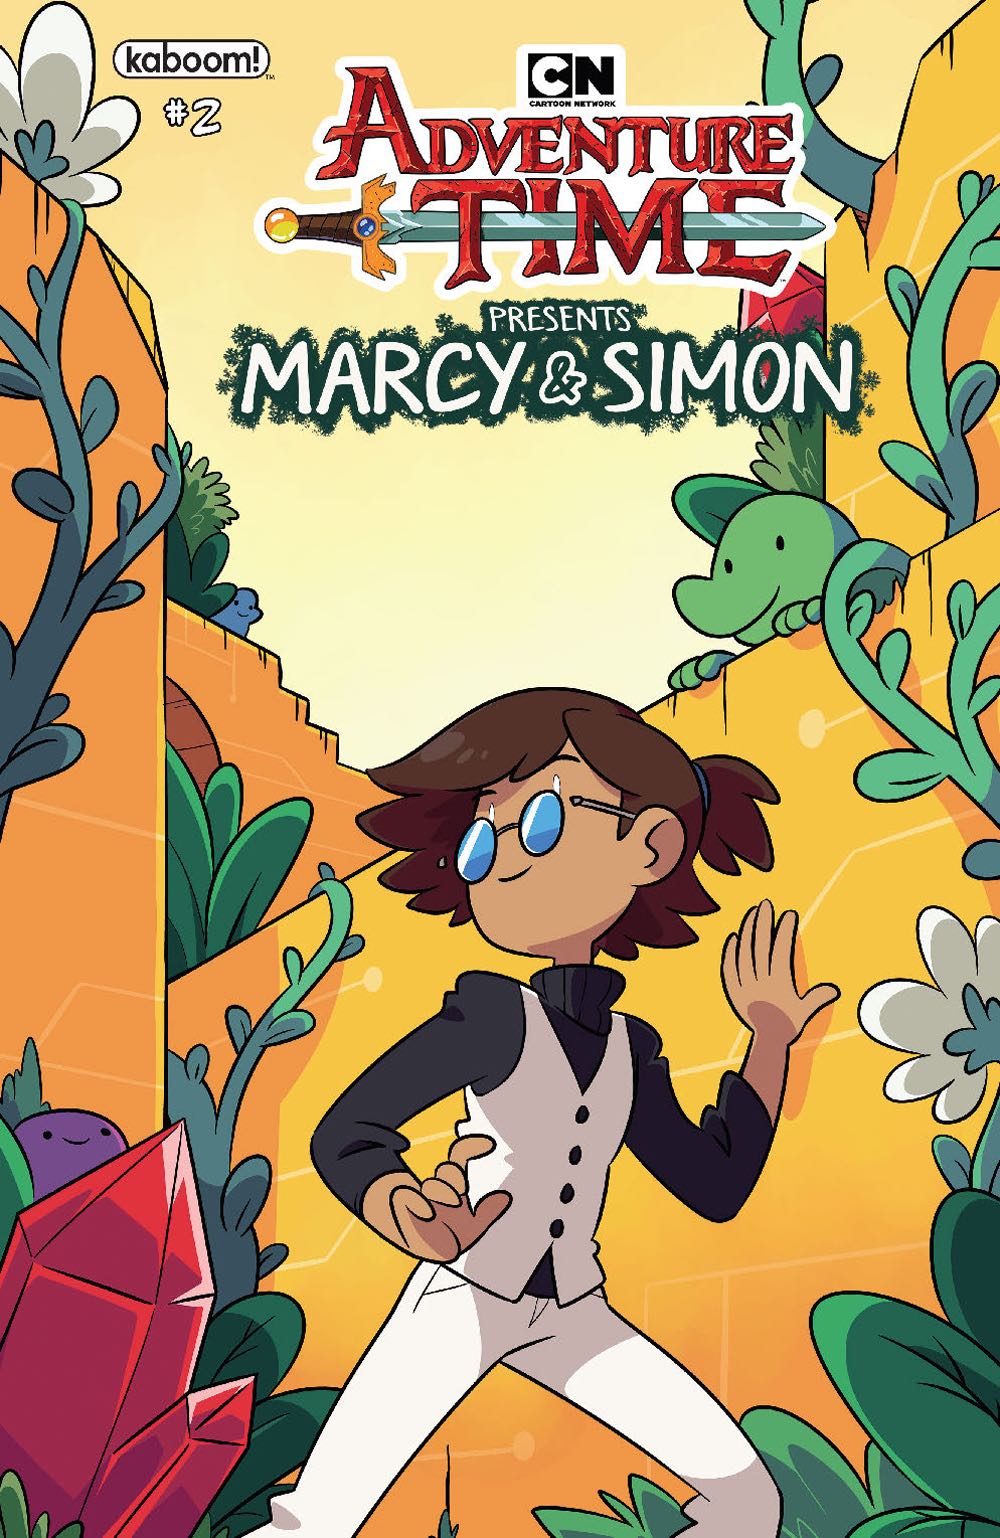 Adventure time marcy and simon comic